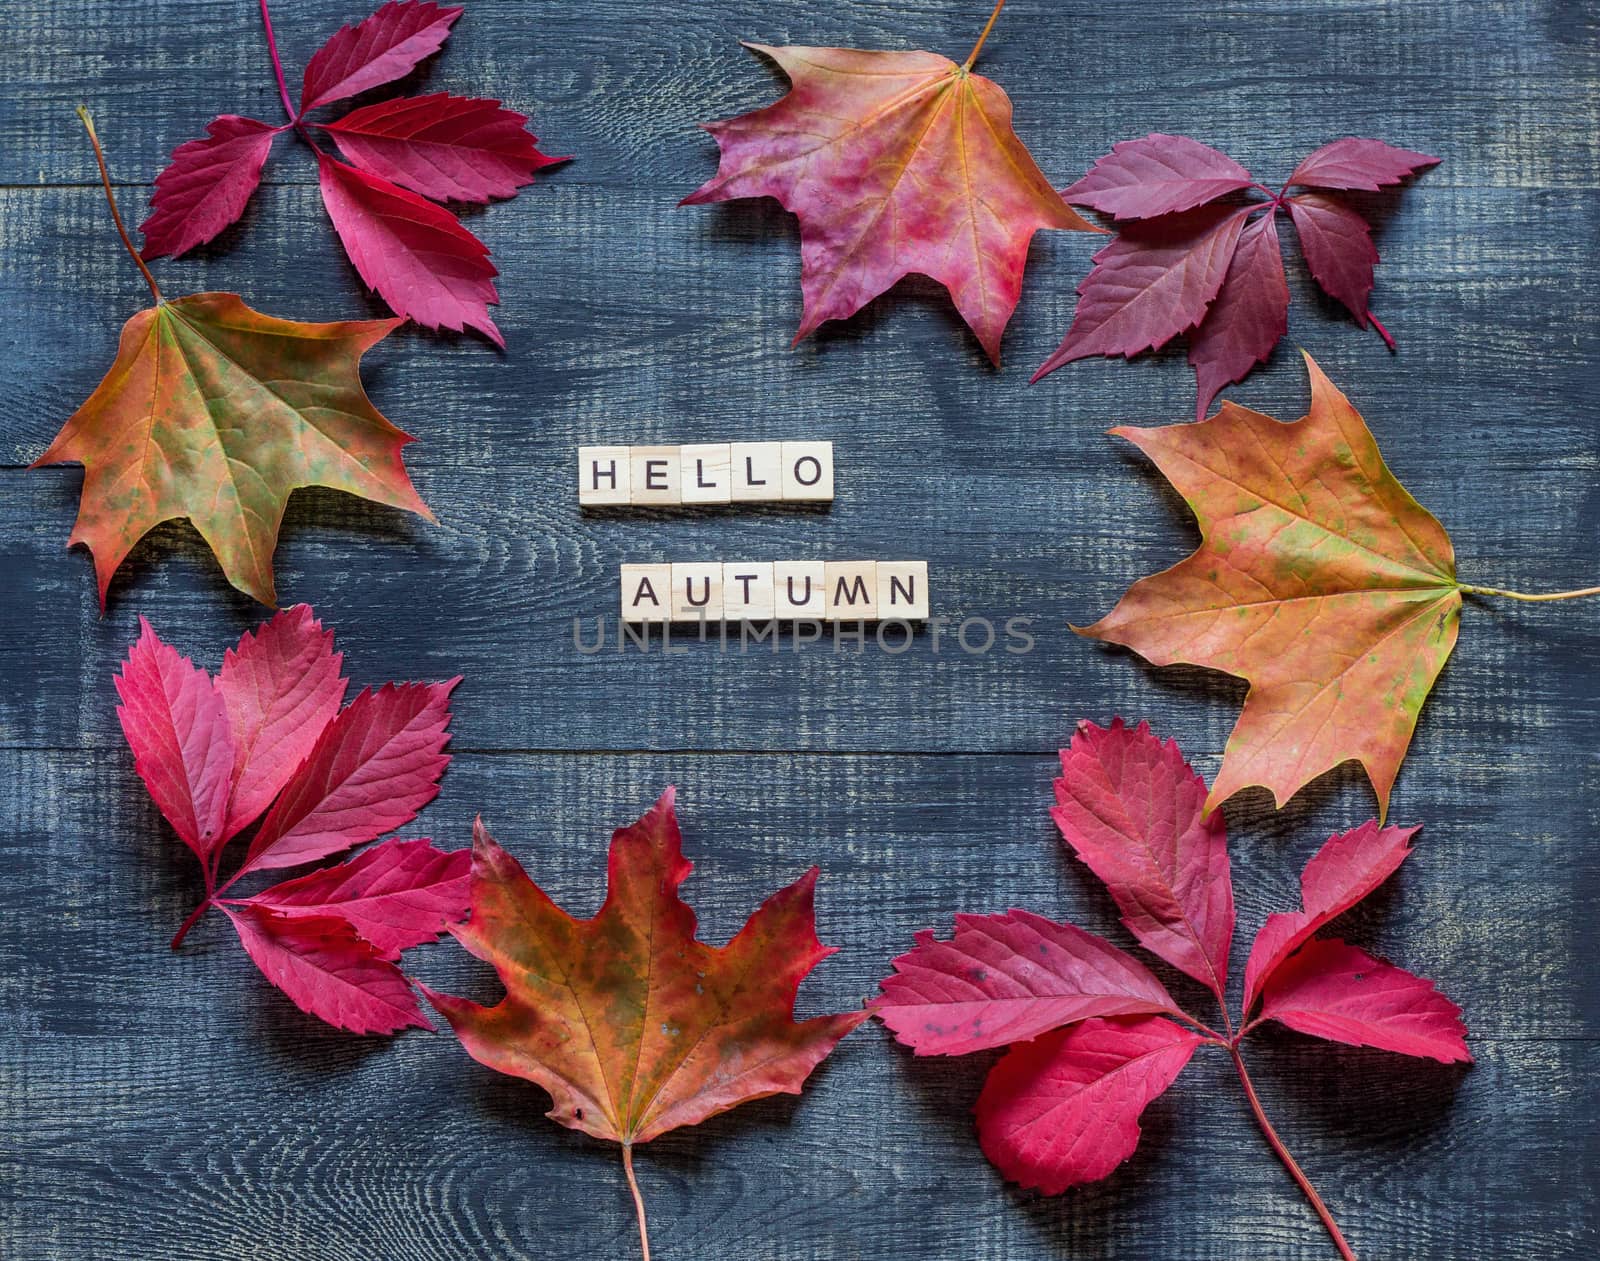 Autumn flat lay with multicolored fallen leaves and hello autumn lettering by galinasharapova